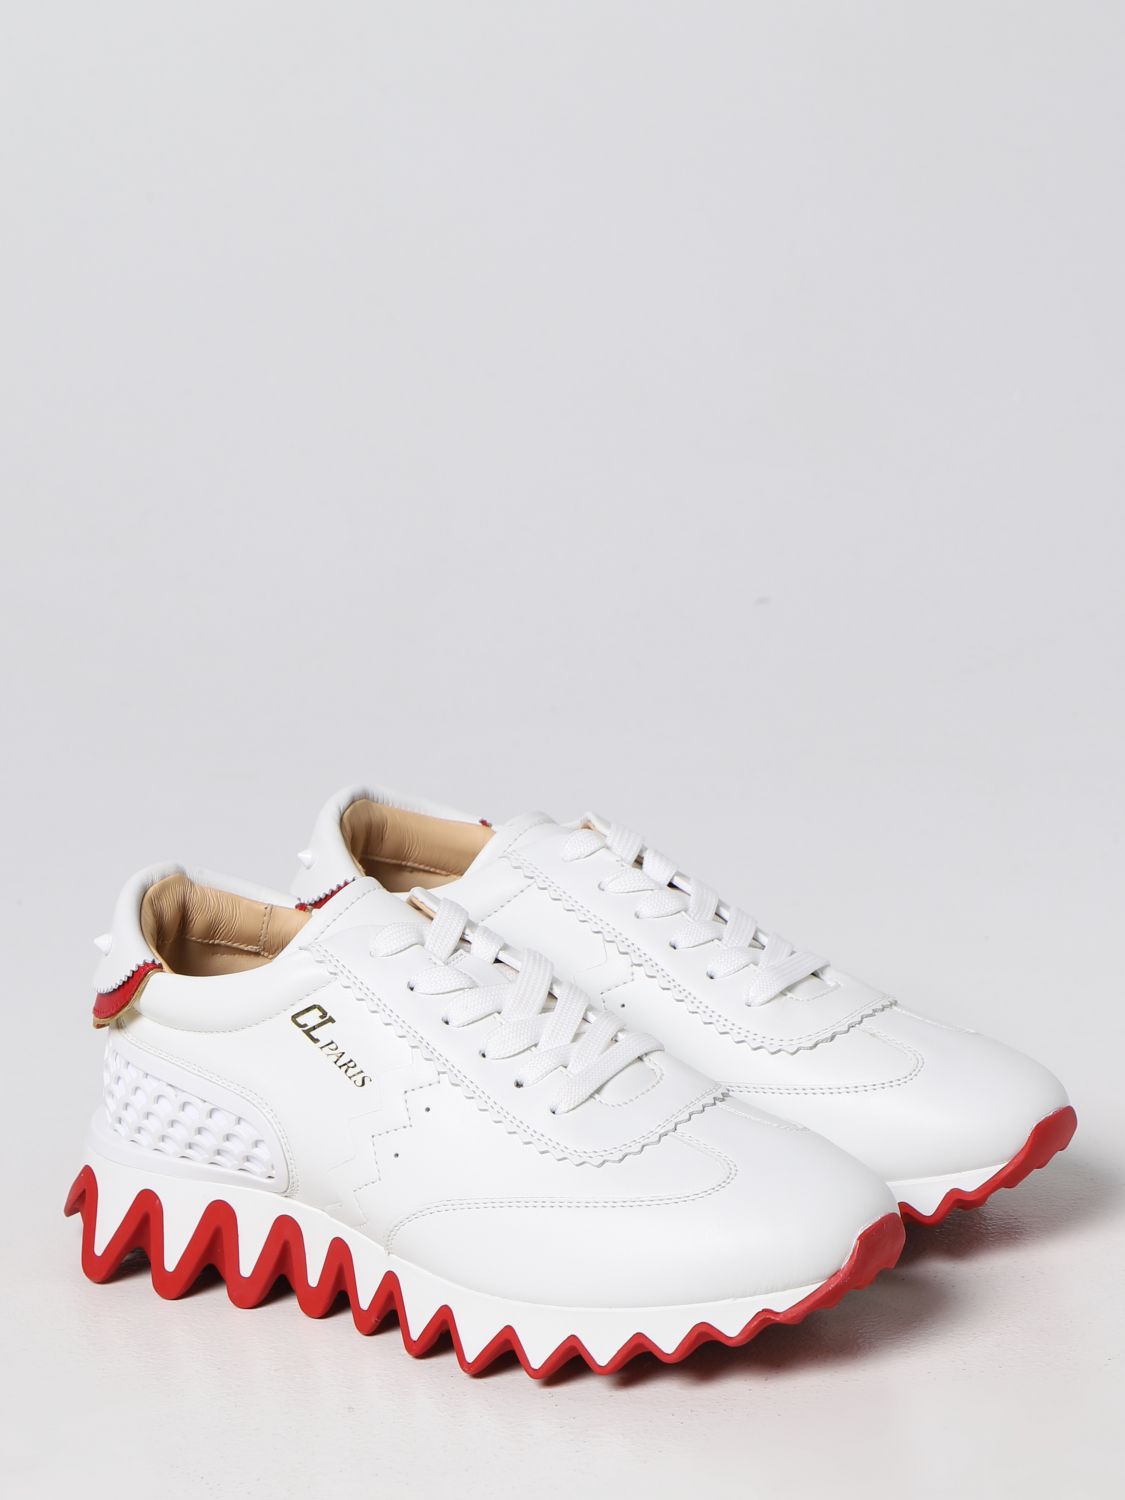 the snow's Gather eye CHRISTIAN LOUBOUTIN: sneakers for woman - White | Christian Louboutin  sneakers 3200260 online on GIGLIO.COM